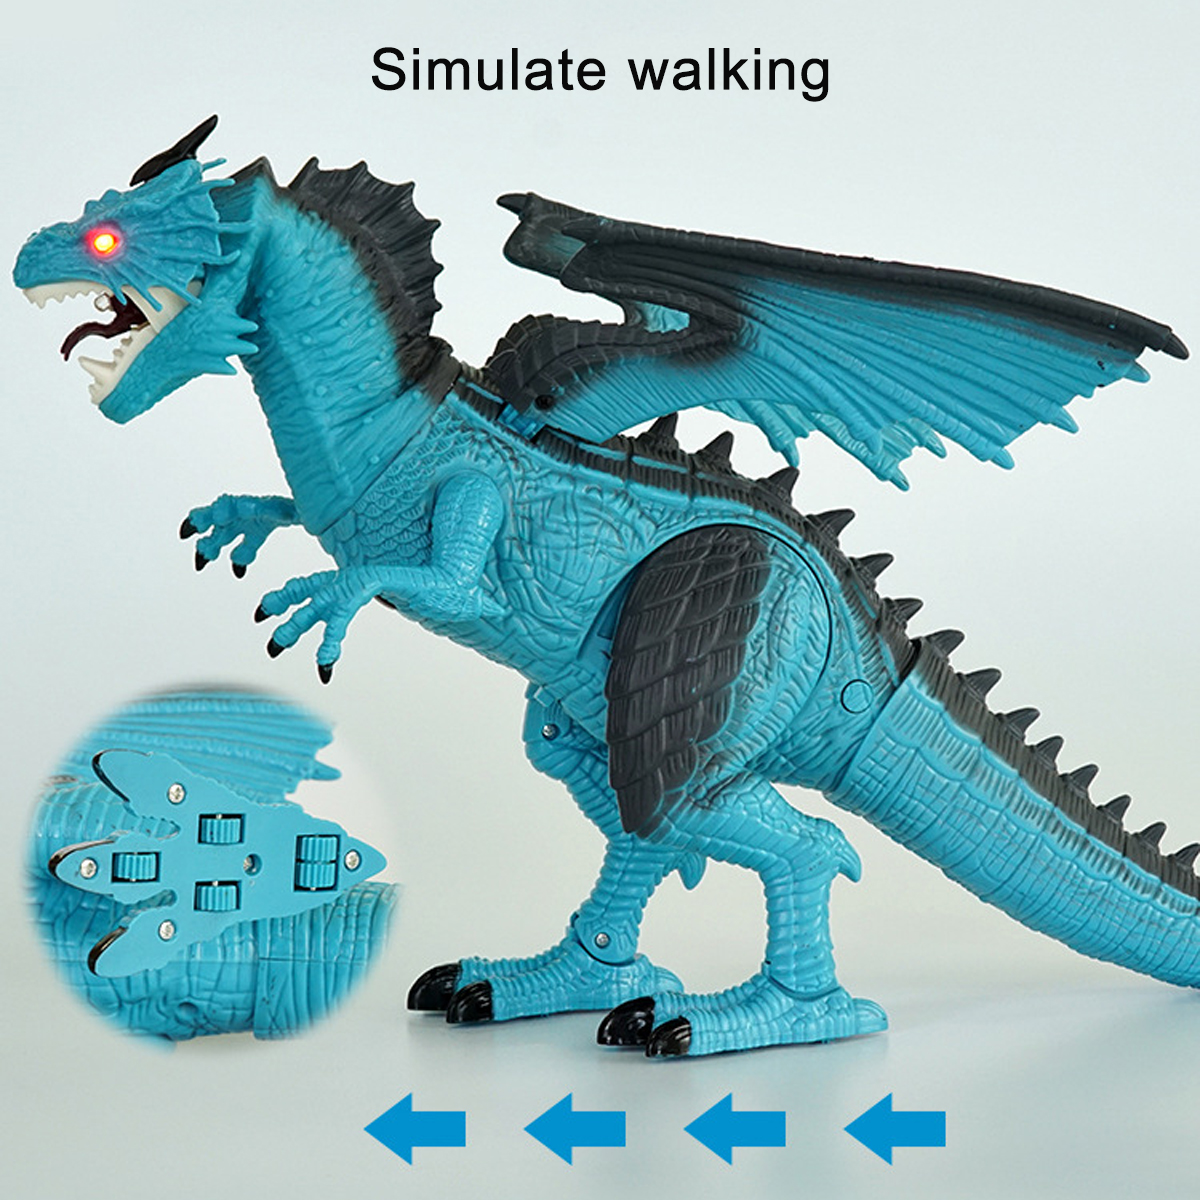 Remote-Control-360deg-Rotate-Spray-Dinosaur-with-Sound-LED-Light-and-Simulate-Flame-Diecast-Model-To-1773231-5